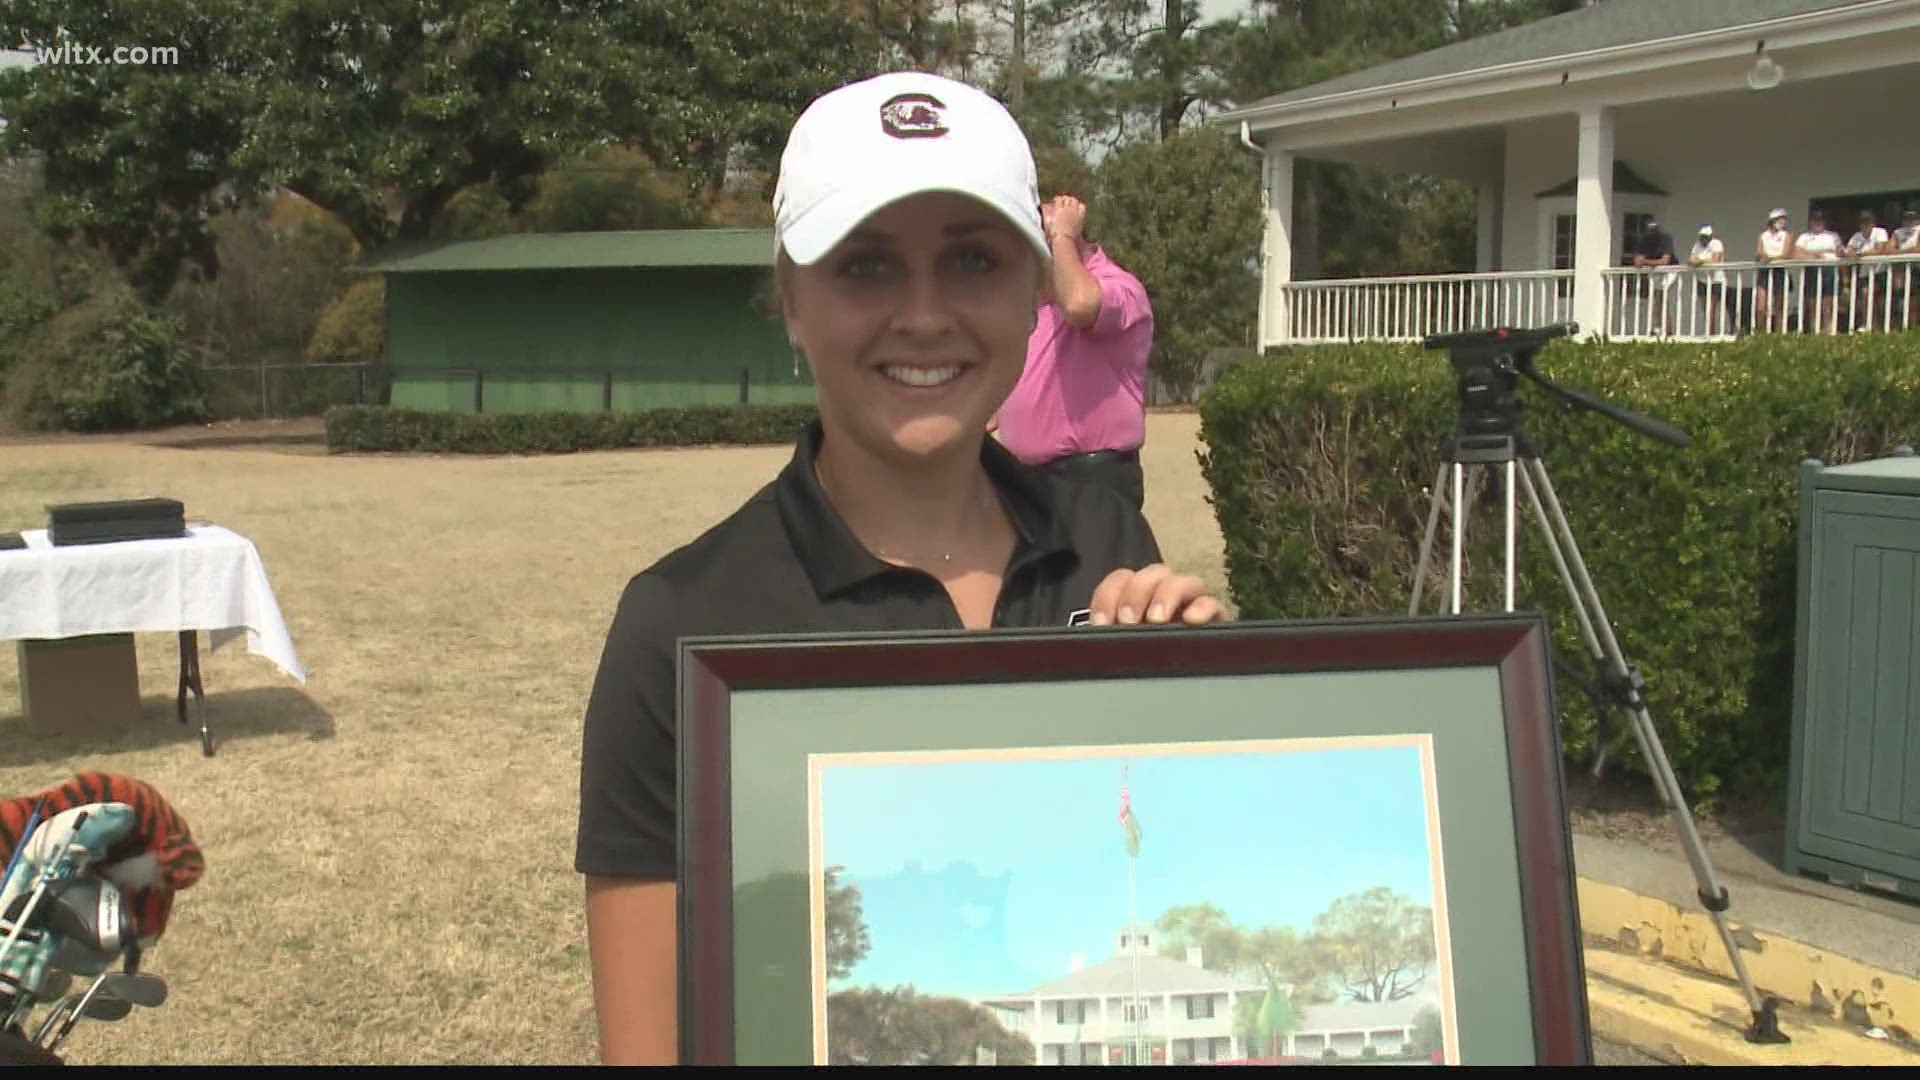 South Carolina golfer Pauline Roussine-Bouchard has been received an SEC award for her recent play in Athens and Augusta.